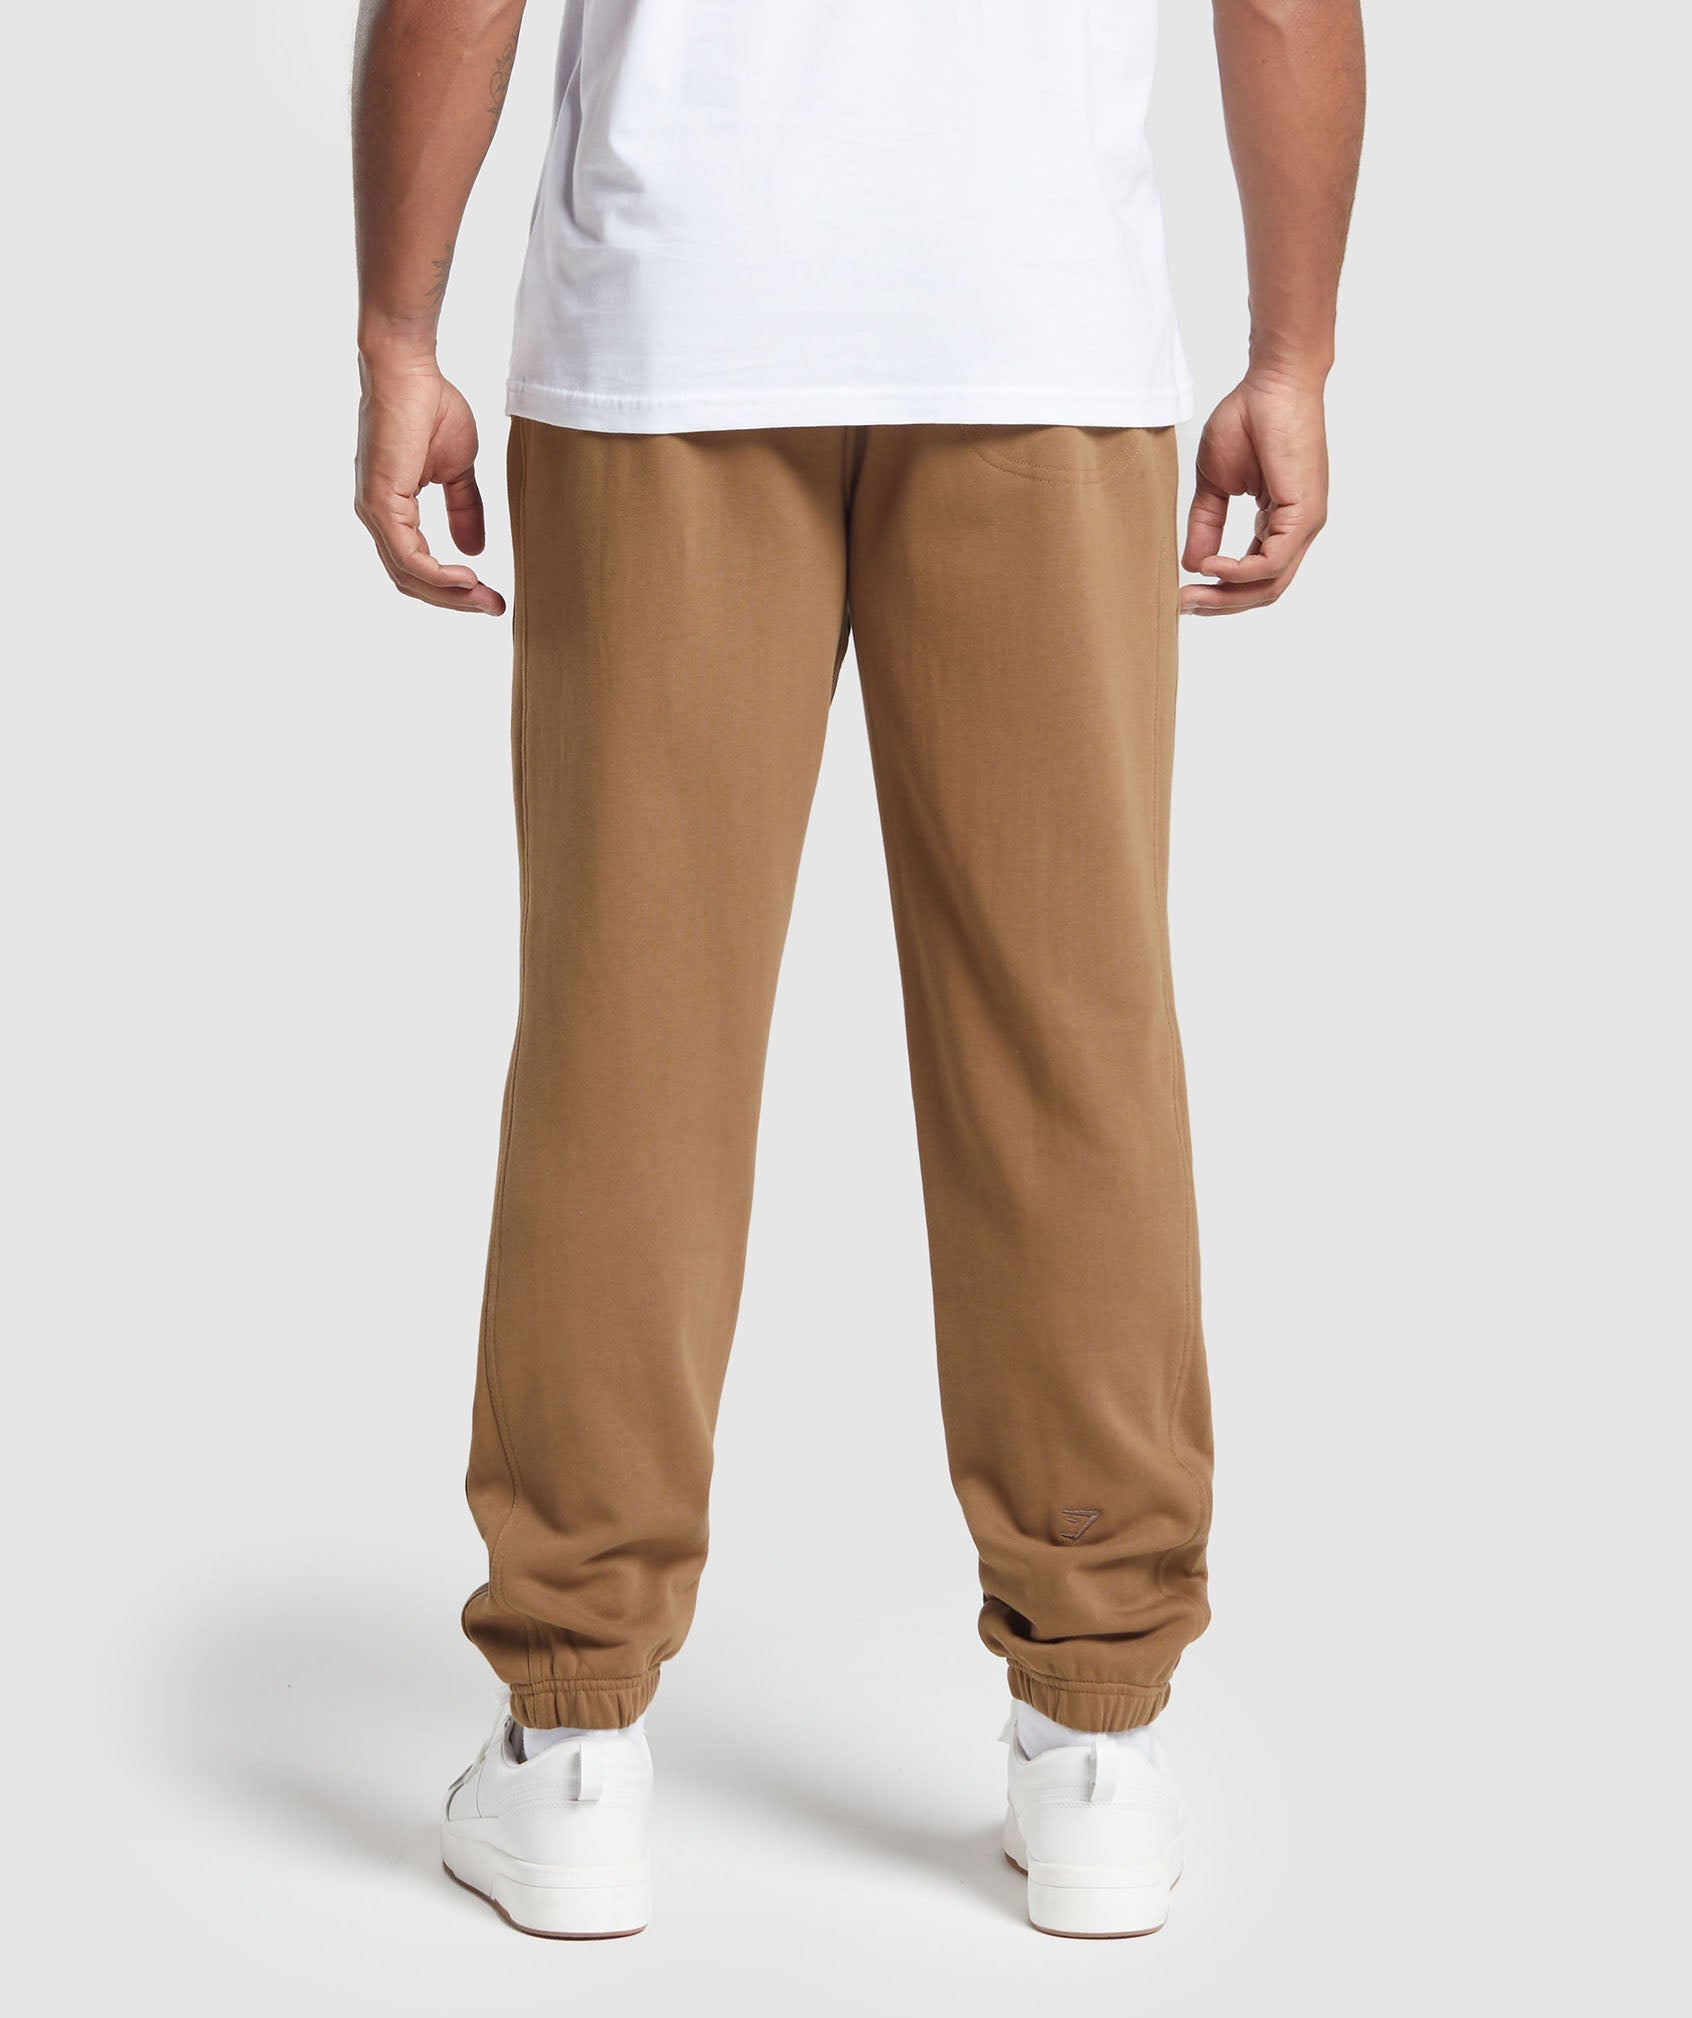 Rest Day Essentials Joggers in Caramel Brown - view 3